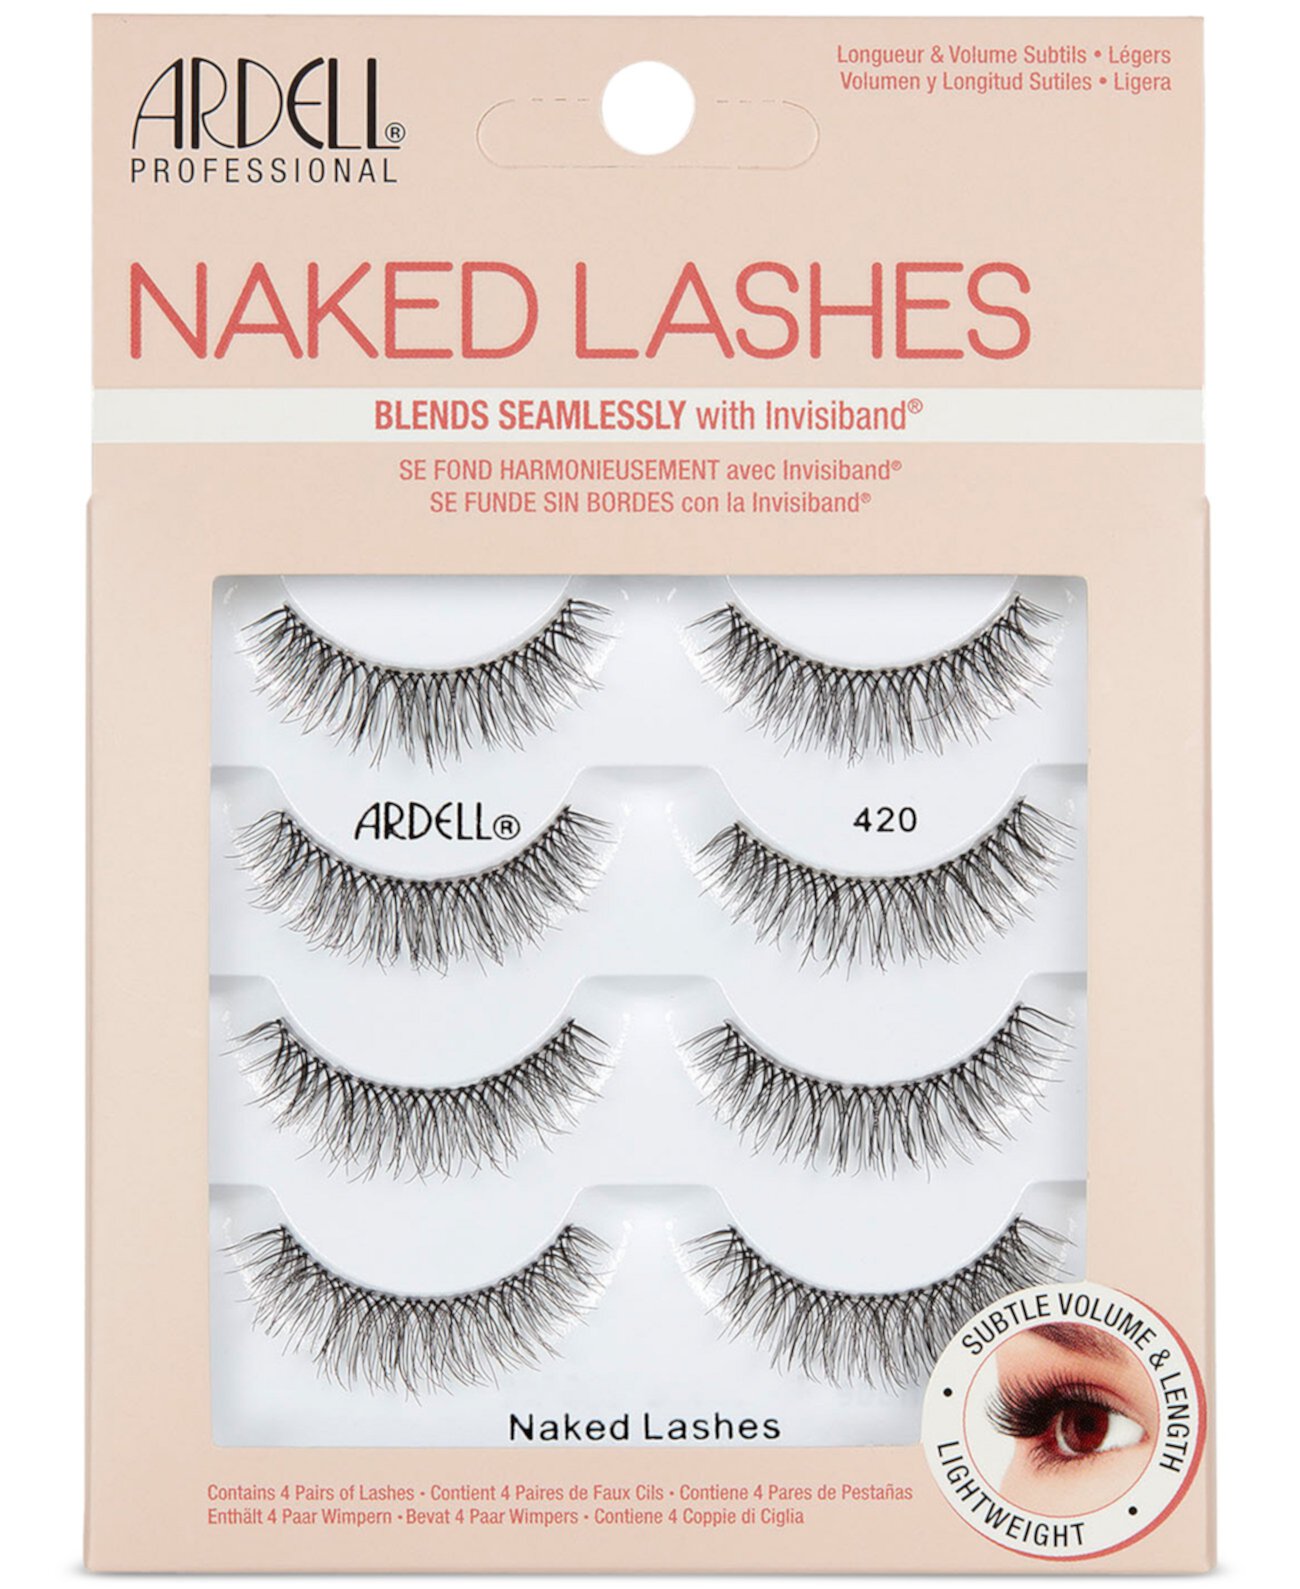 Naked Lashes #420 - 4 Pairs ARDELL